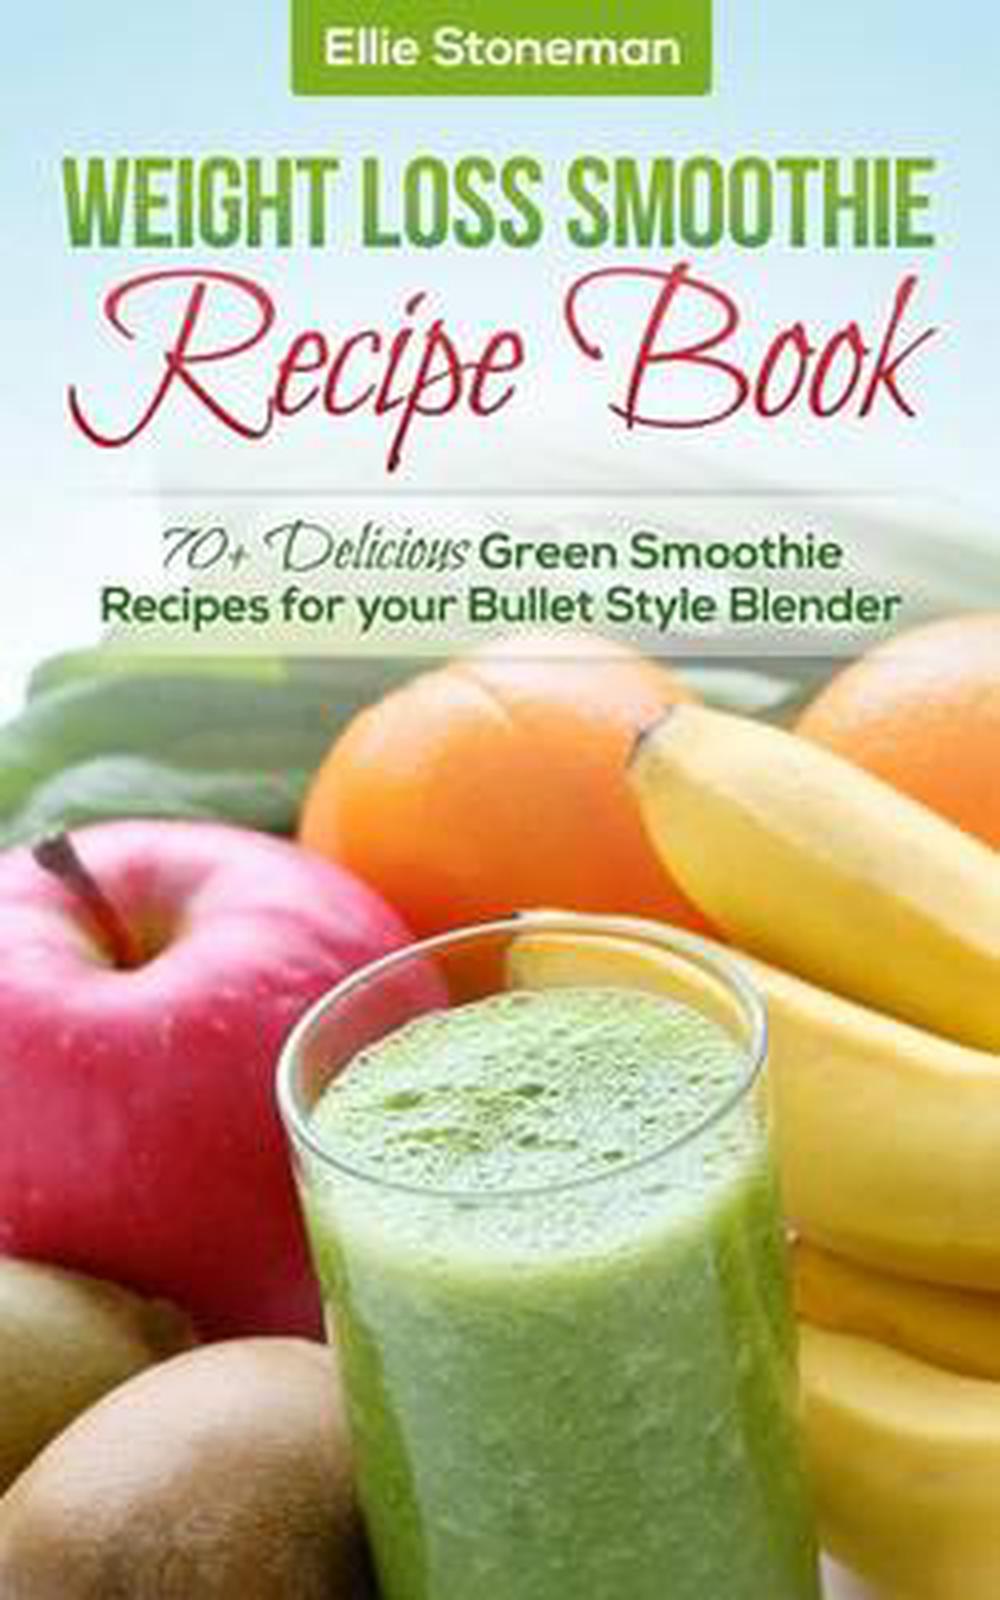 Weight Loss Smoothie Recipe Book 70 Delicious Green Smoothie Recipes